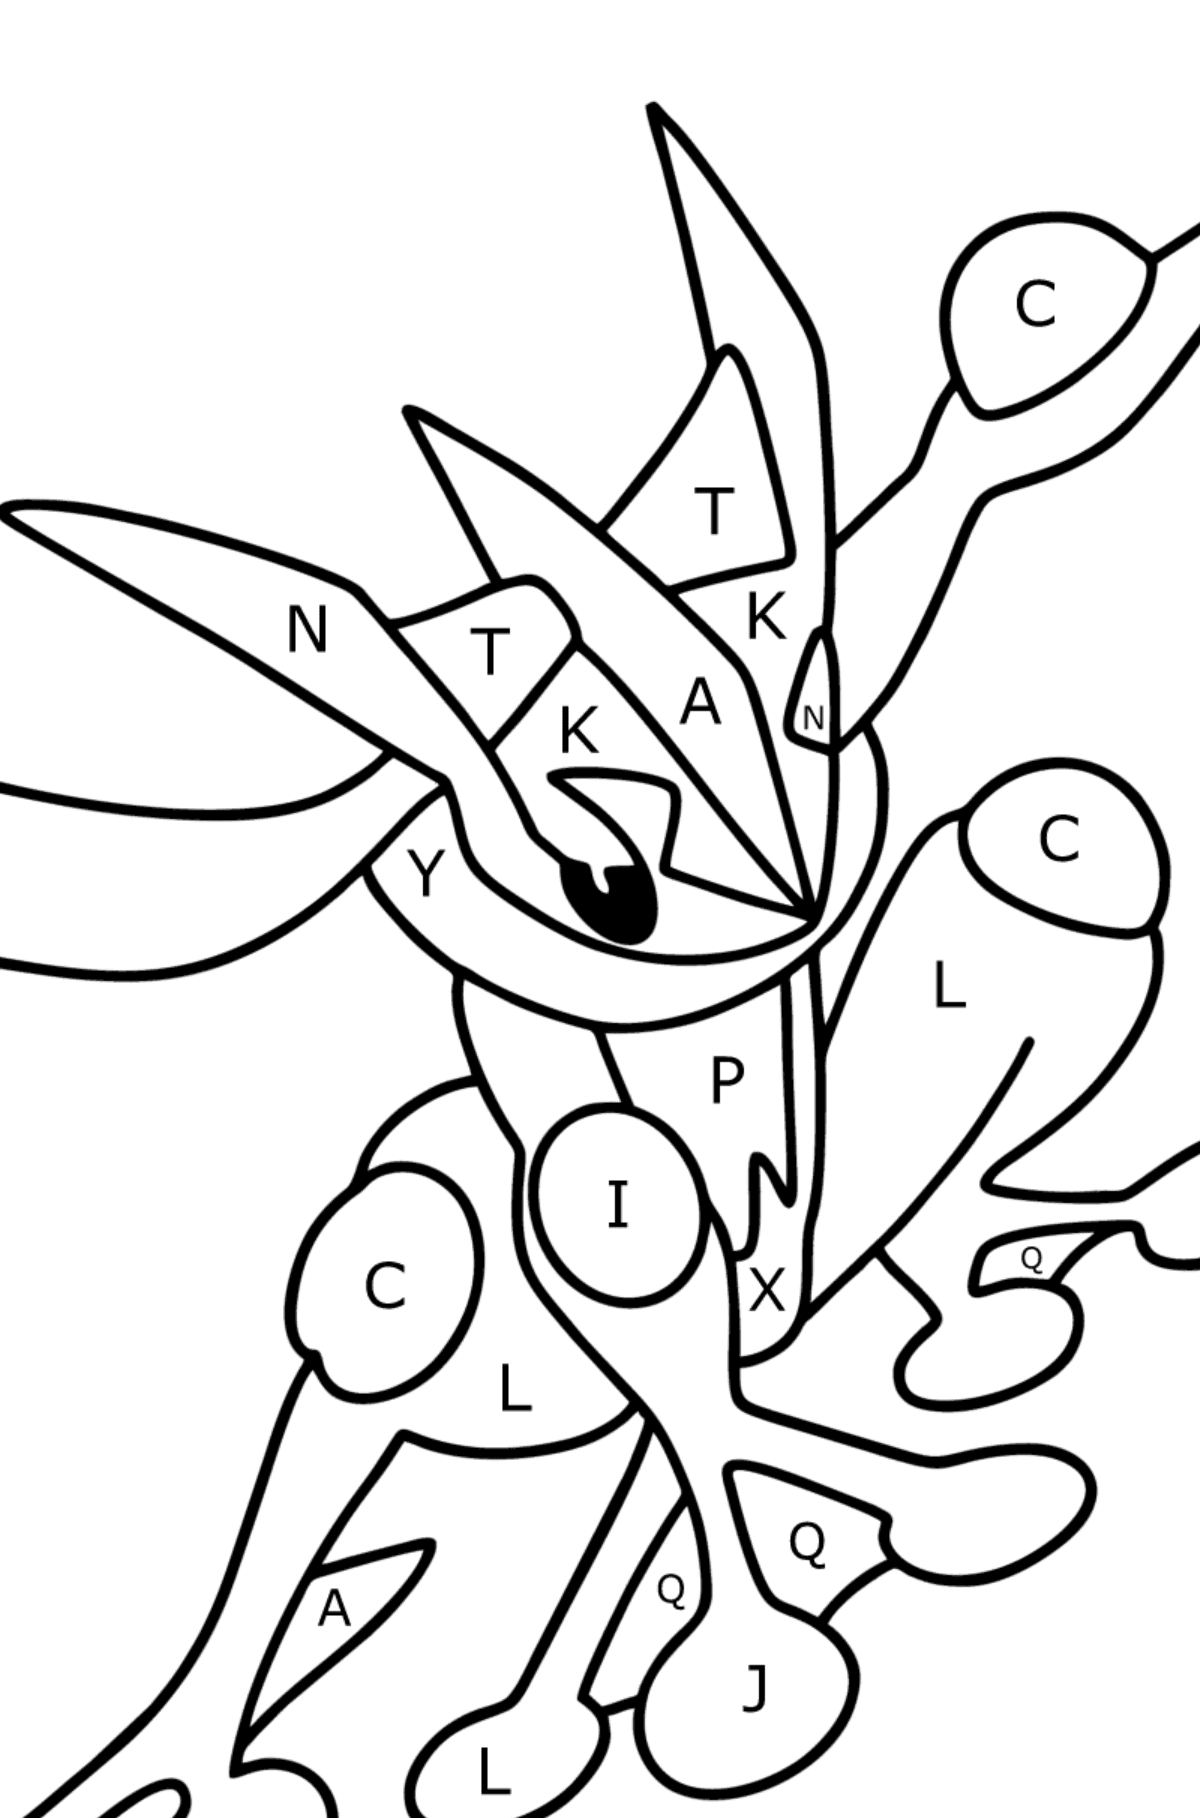 Coloring page Pokemon Go Greninja - Coloring by Letters for Kids